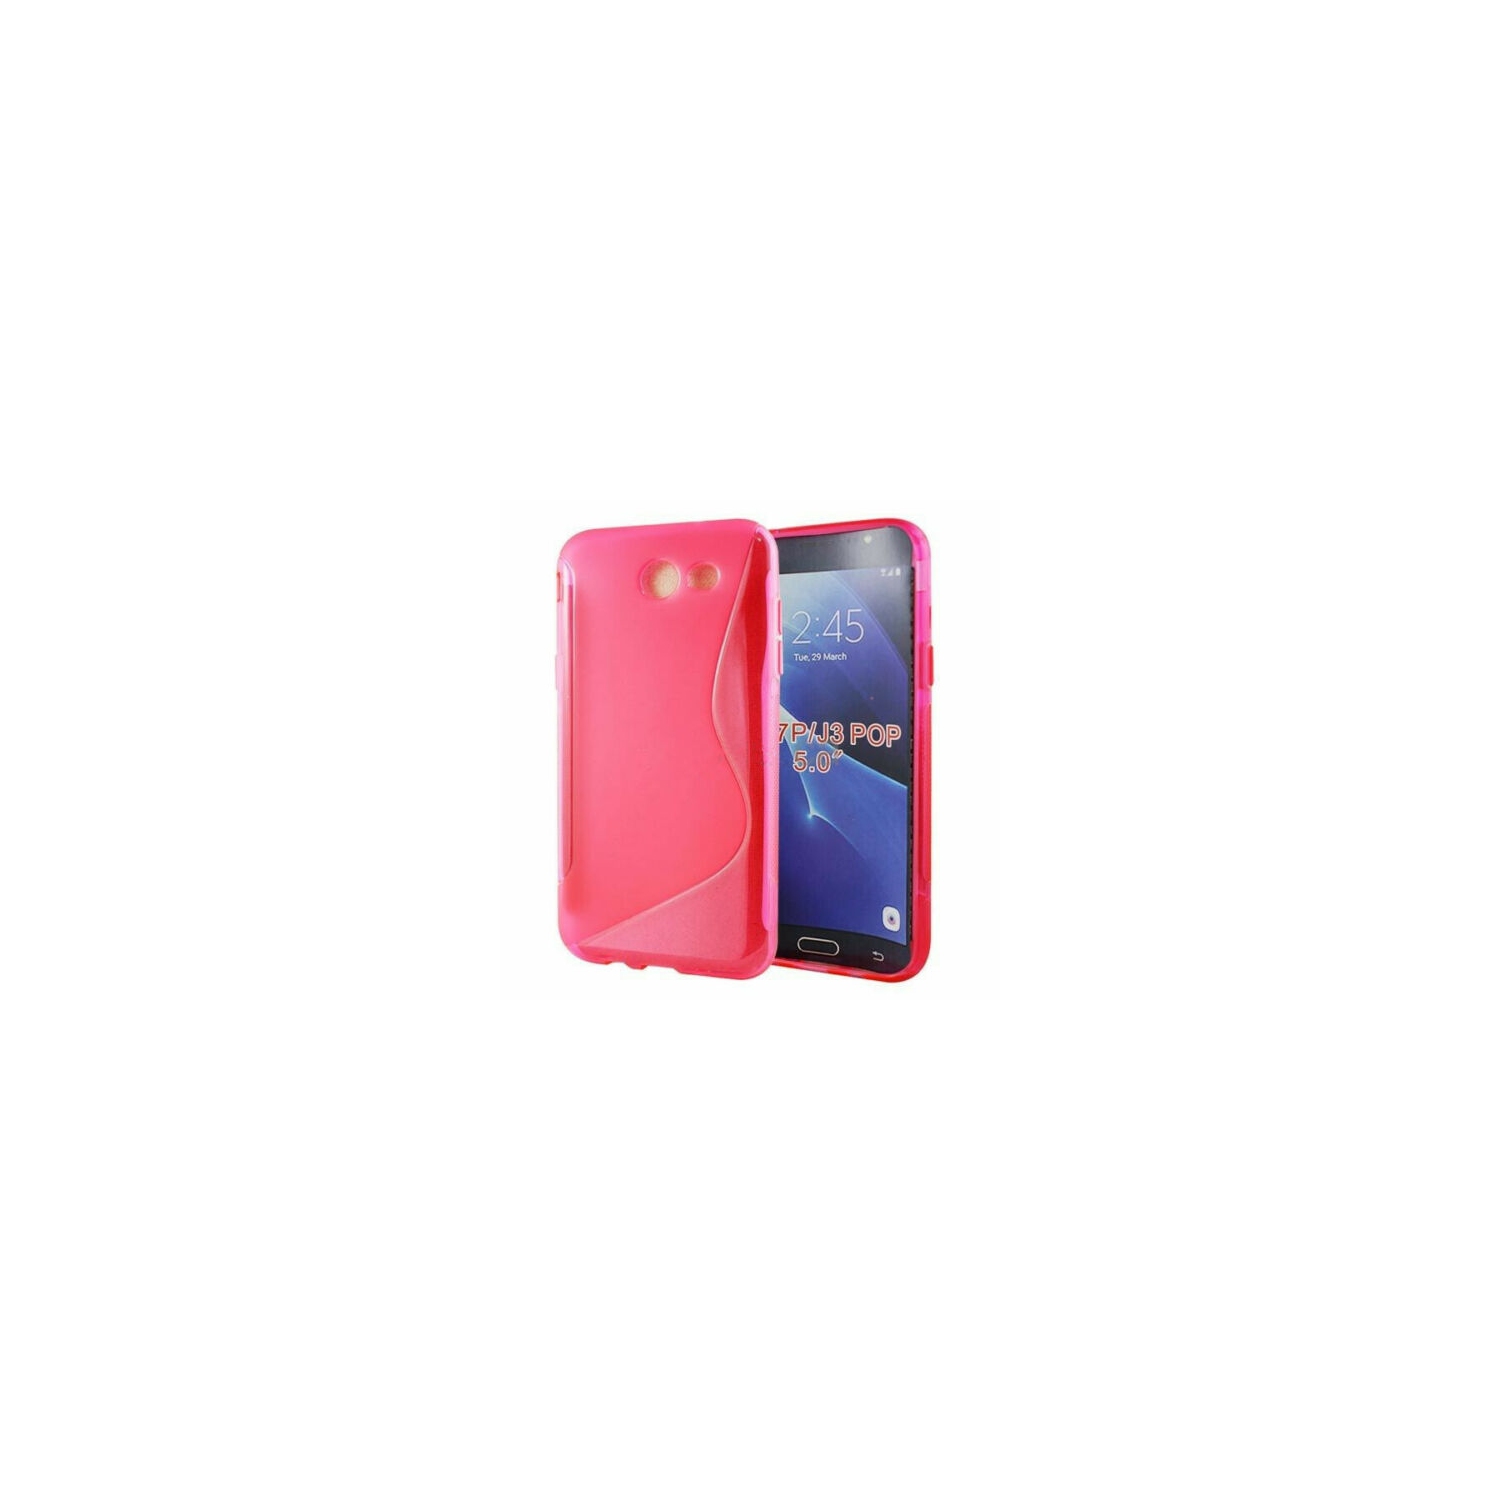 【CSmart】 Ultra Thin Soft TPU Silicone Jelly Bumper Back Cover Case for Samsung Galaxy J3 Prime / J3 2017, Hot Pink